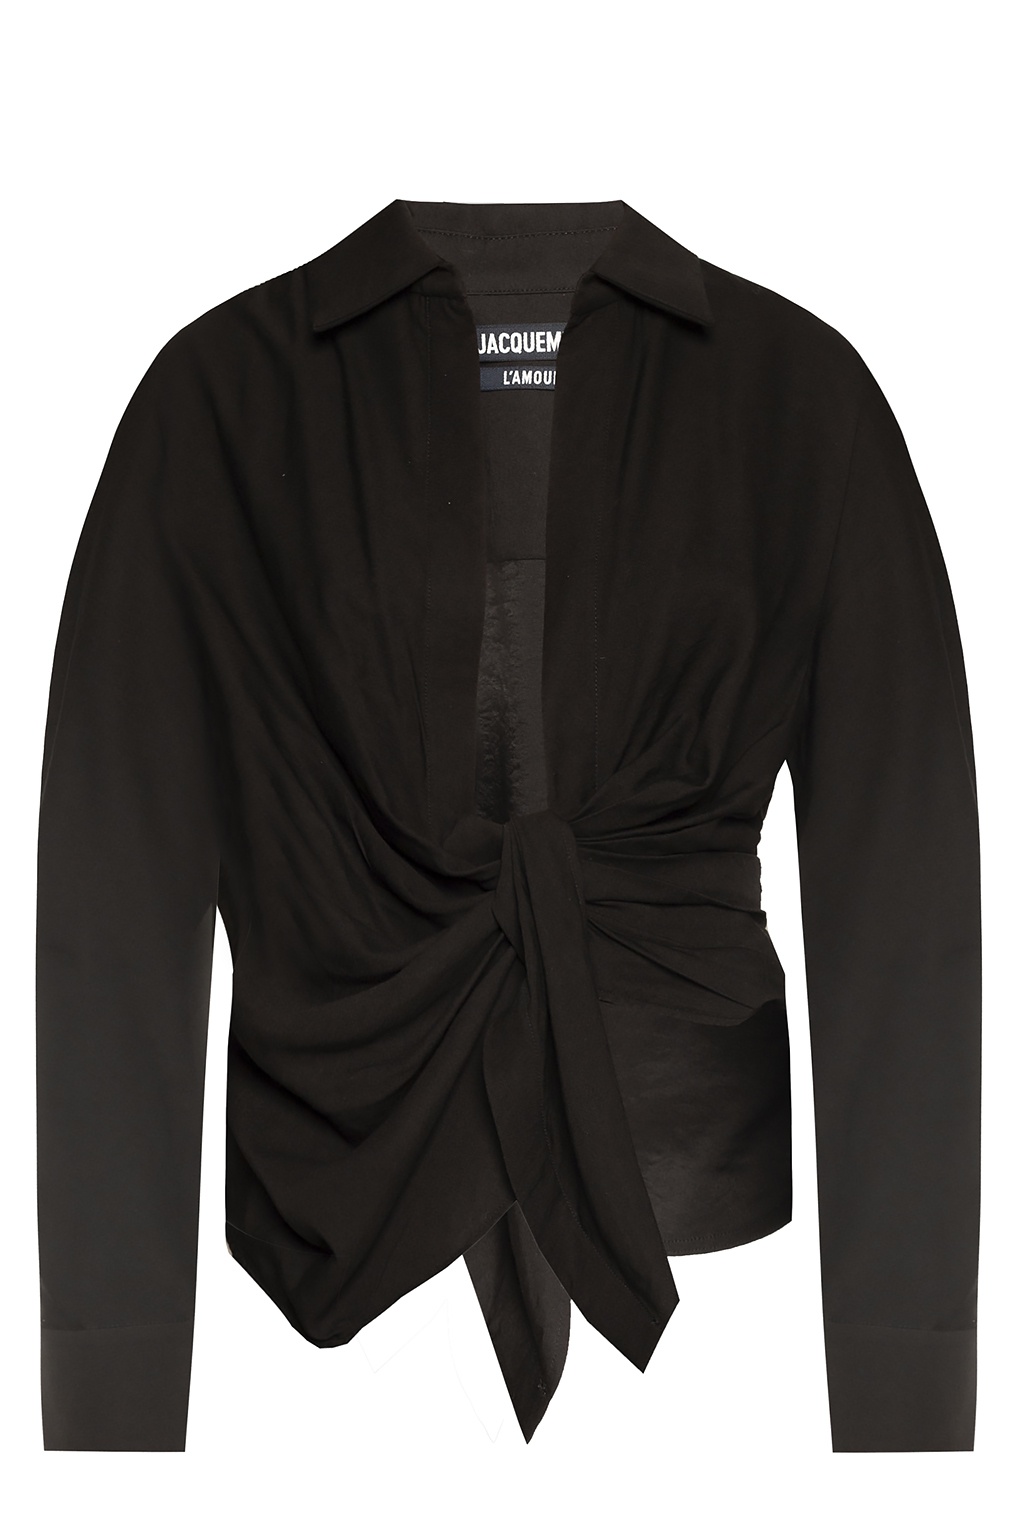 Jacquemus Knotted shirt | Women's ...